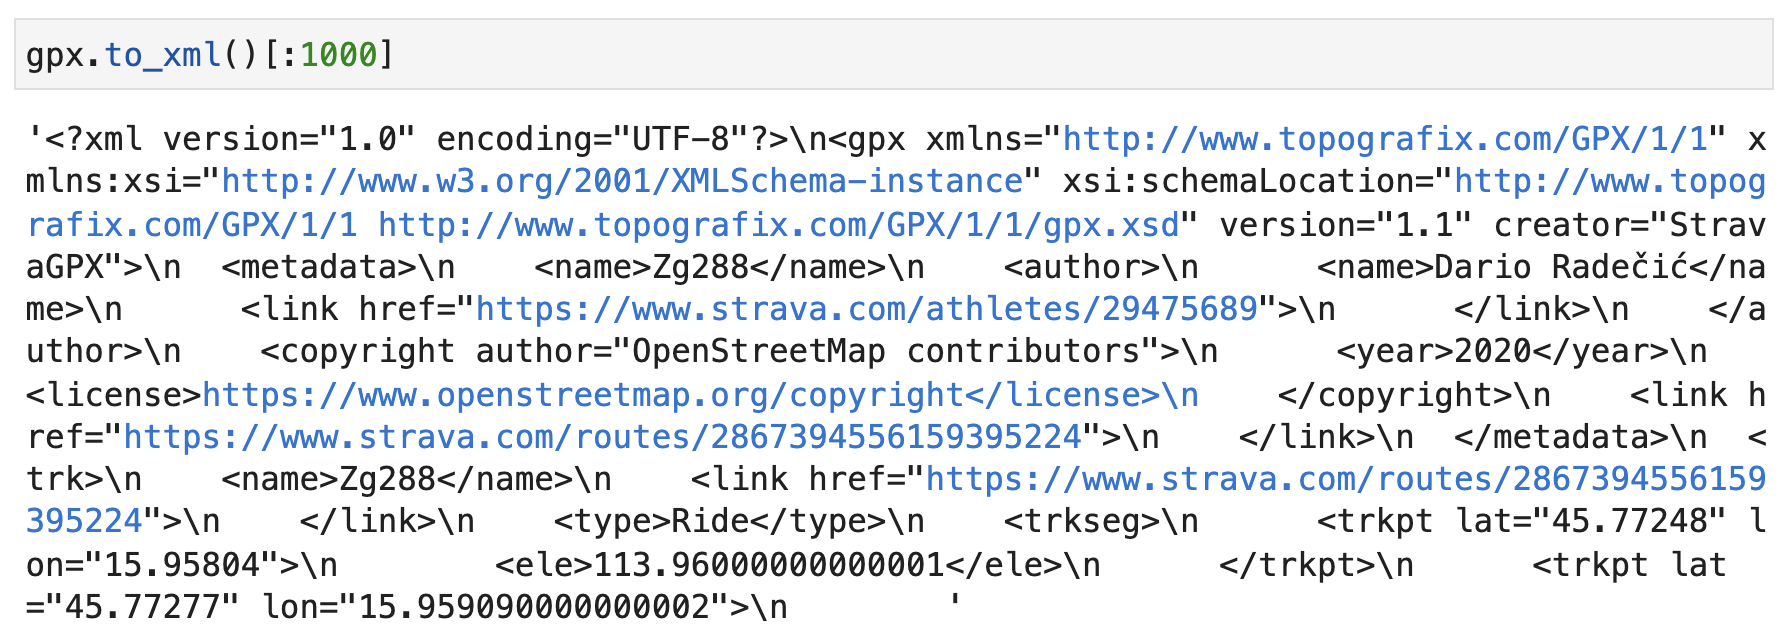 Image 6 — GPX file in XML format (image by author)